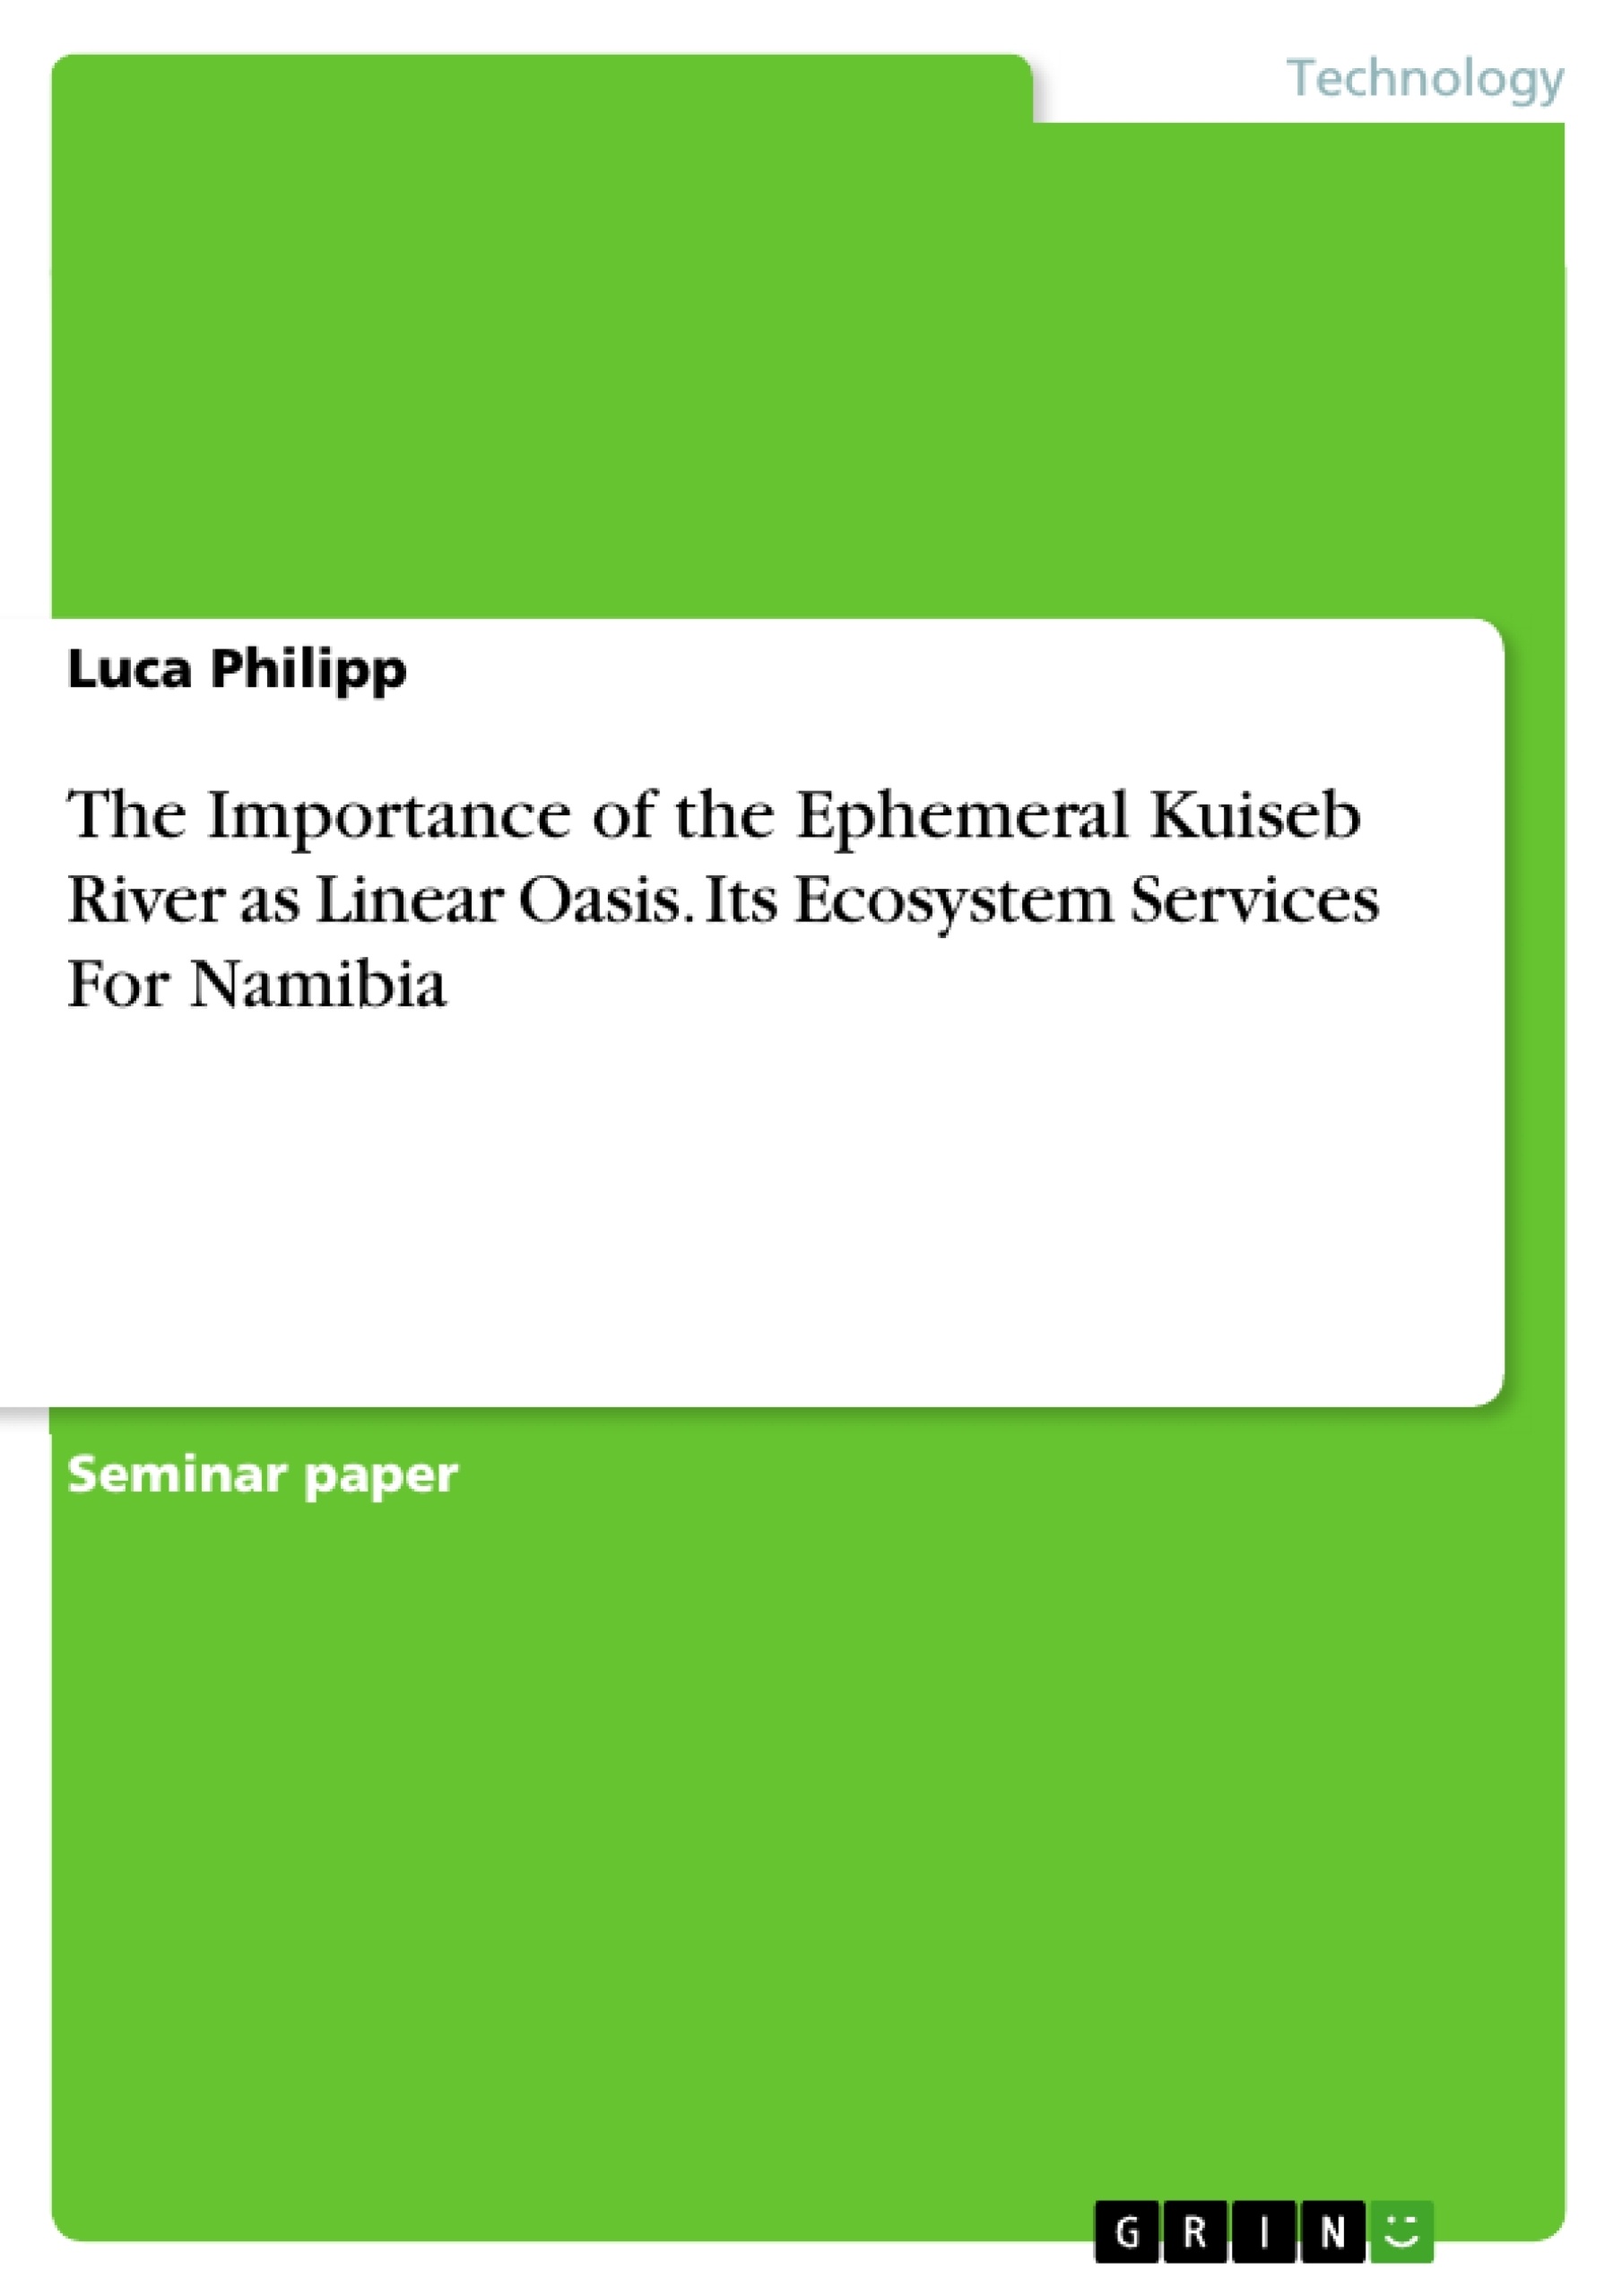 Title: The Importance of the Ephemeral Kuiseb River as Linear Oasis. Its Ecosystem Services For Namibia